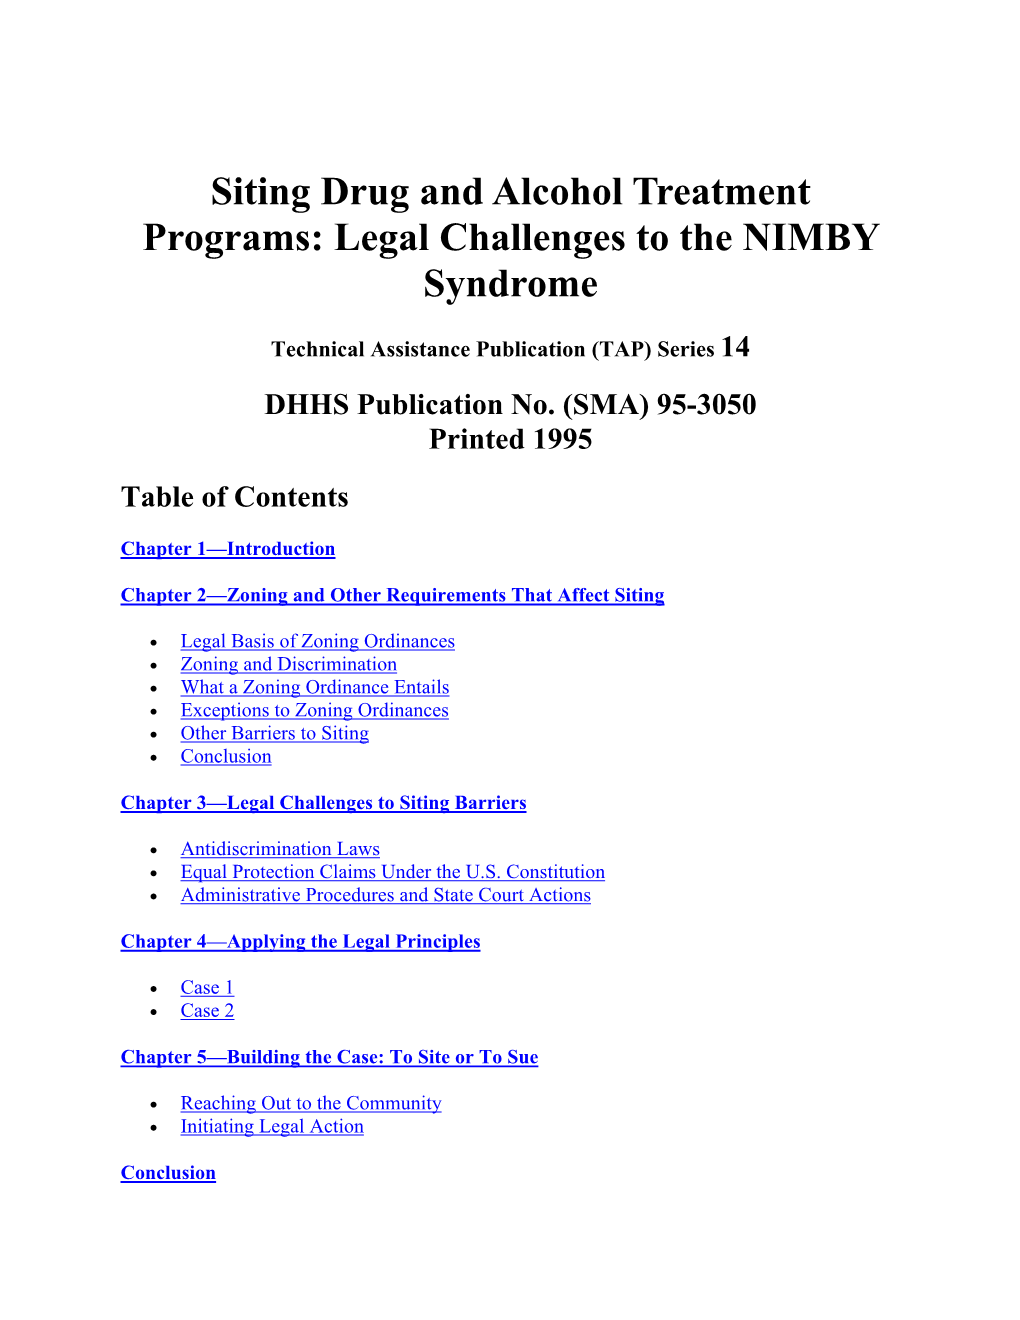 Siting Drug and Alcohol Treatment Programs: Legal Challenges to the NIMBY Syndrome